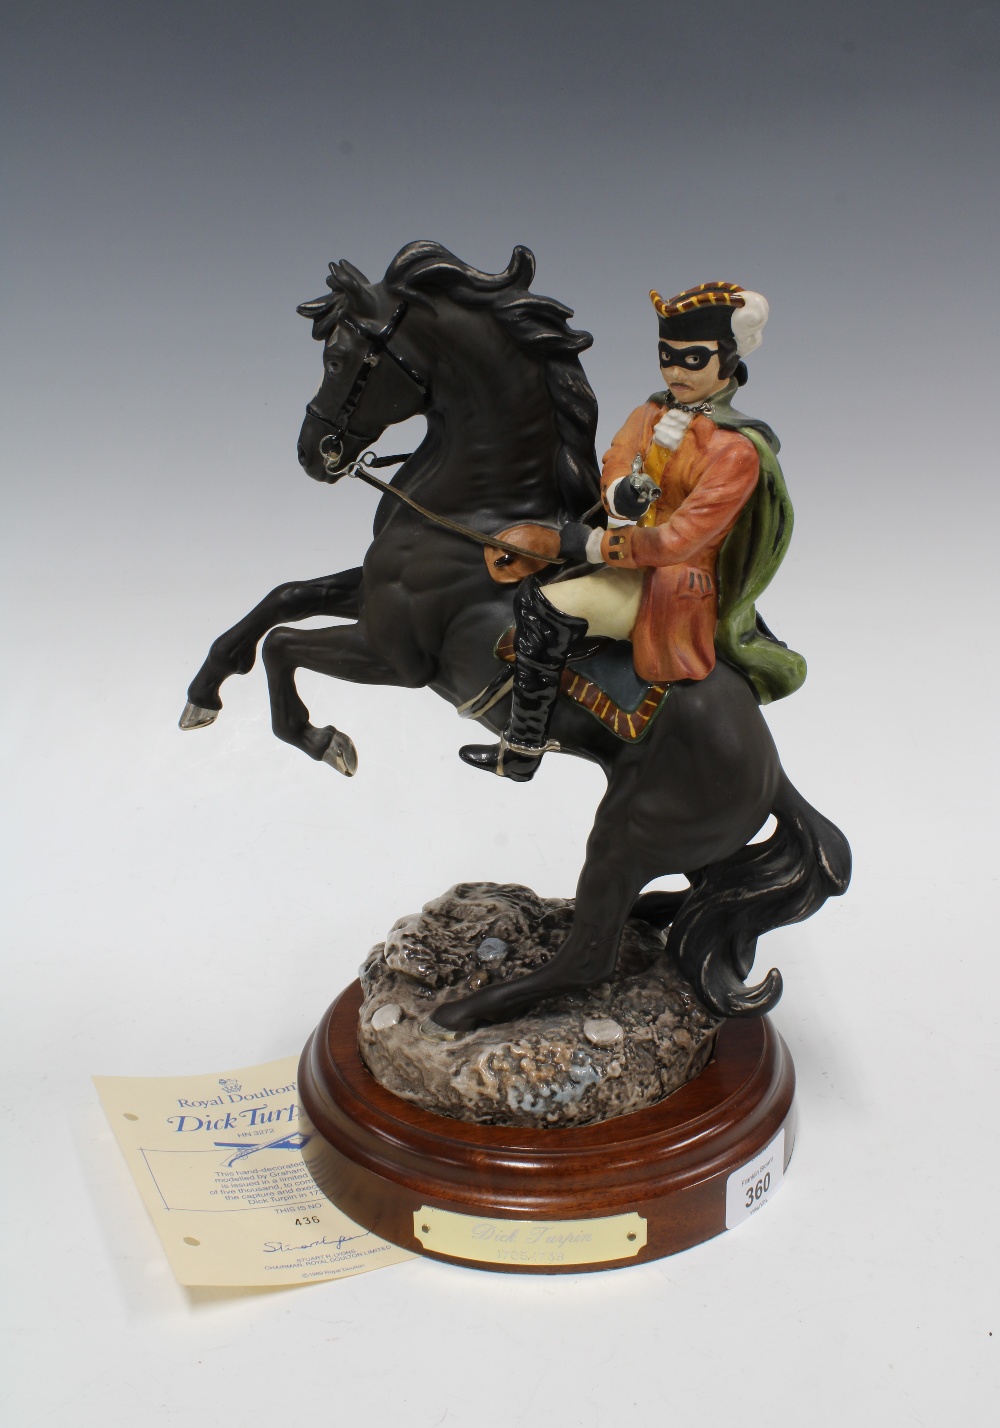 Royal Doulton Dick Turpin, modelled by Graham Tongue, Ltd Ed 436 /5000, on wooden base, 33cm high